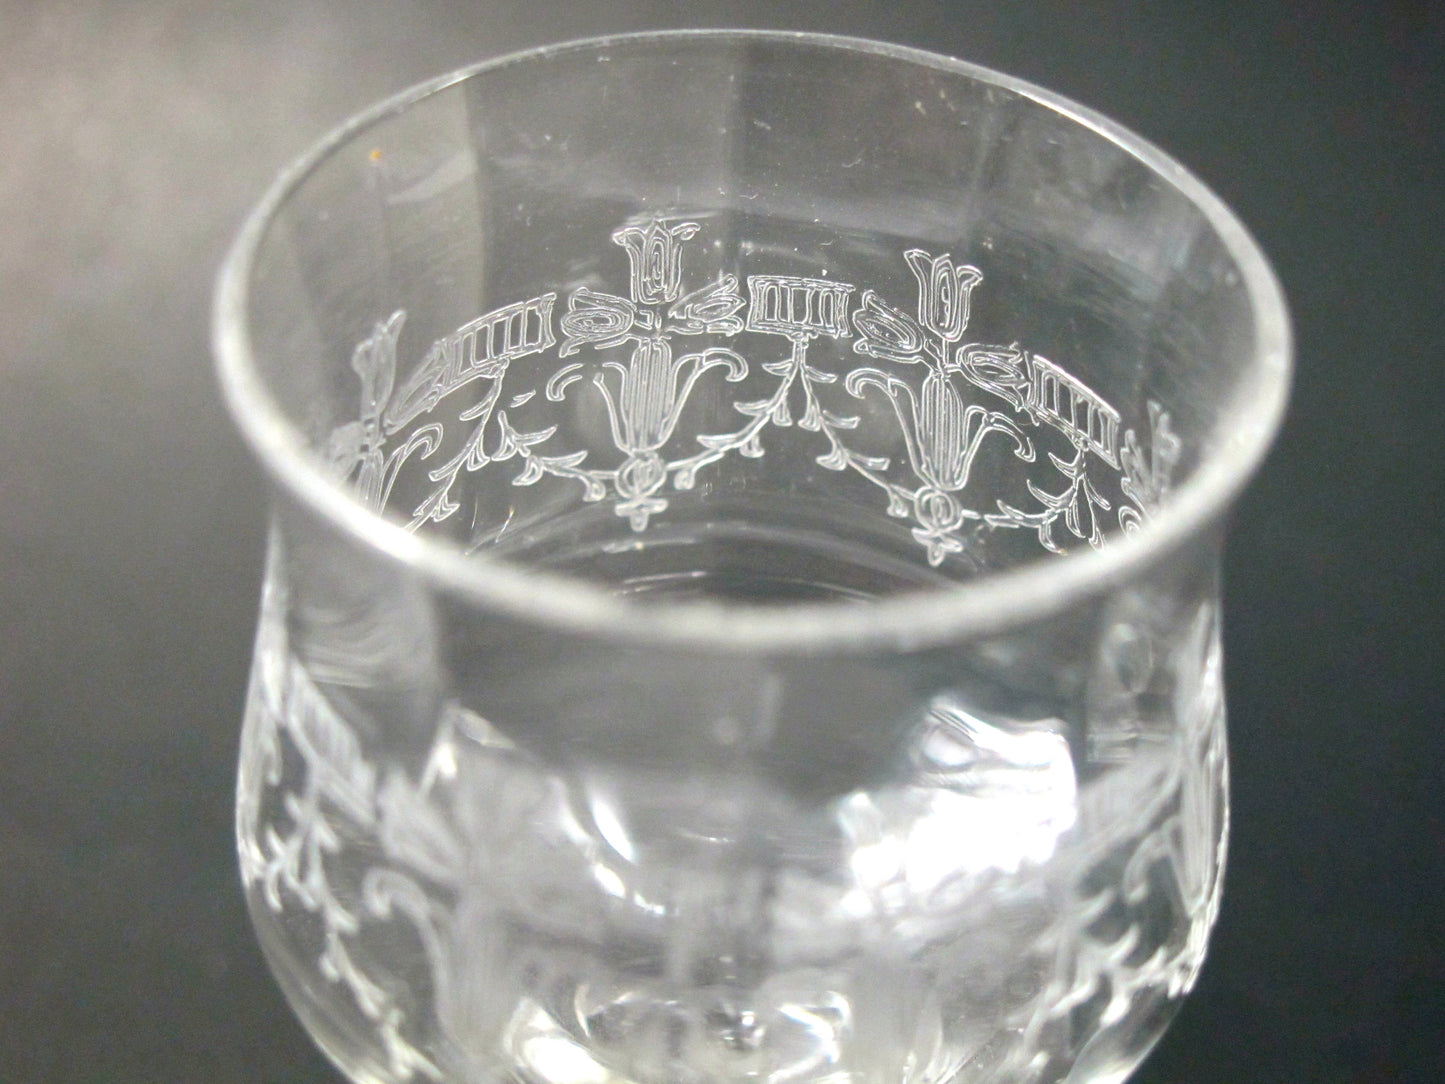 Needle etched  liquor Glass Antique hand blown - O'Rourke crystal awards & gifts abp cut glass